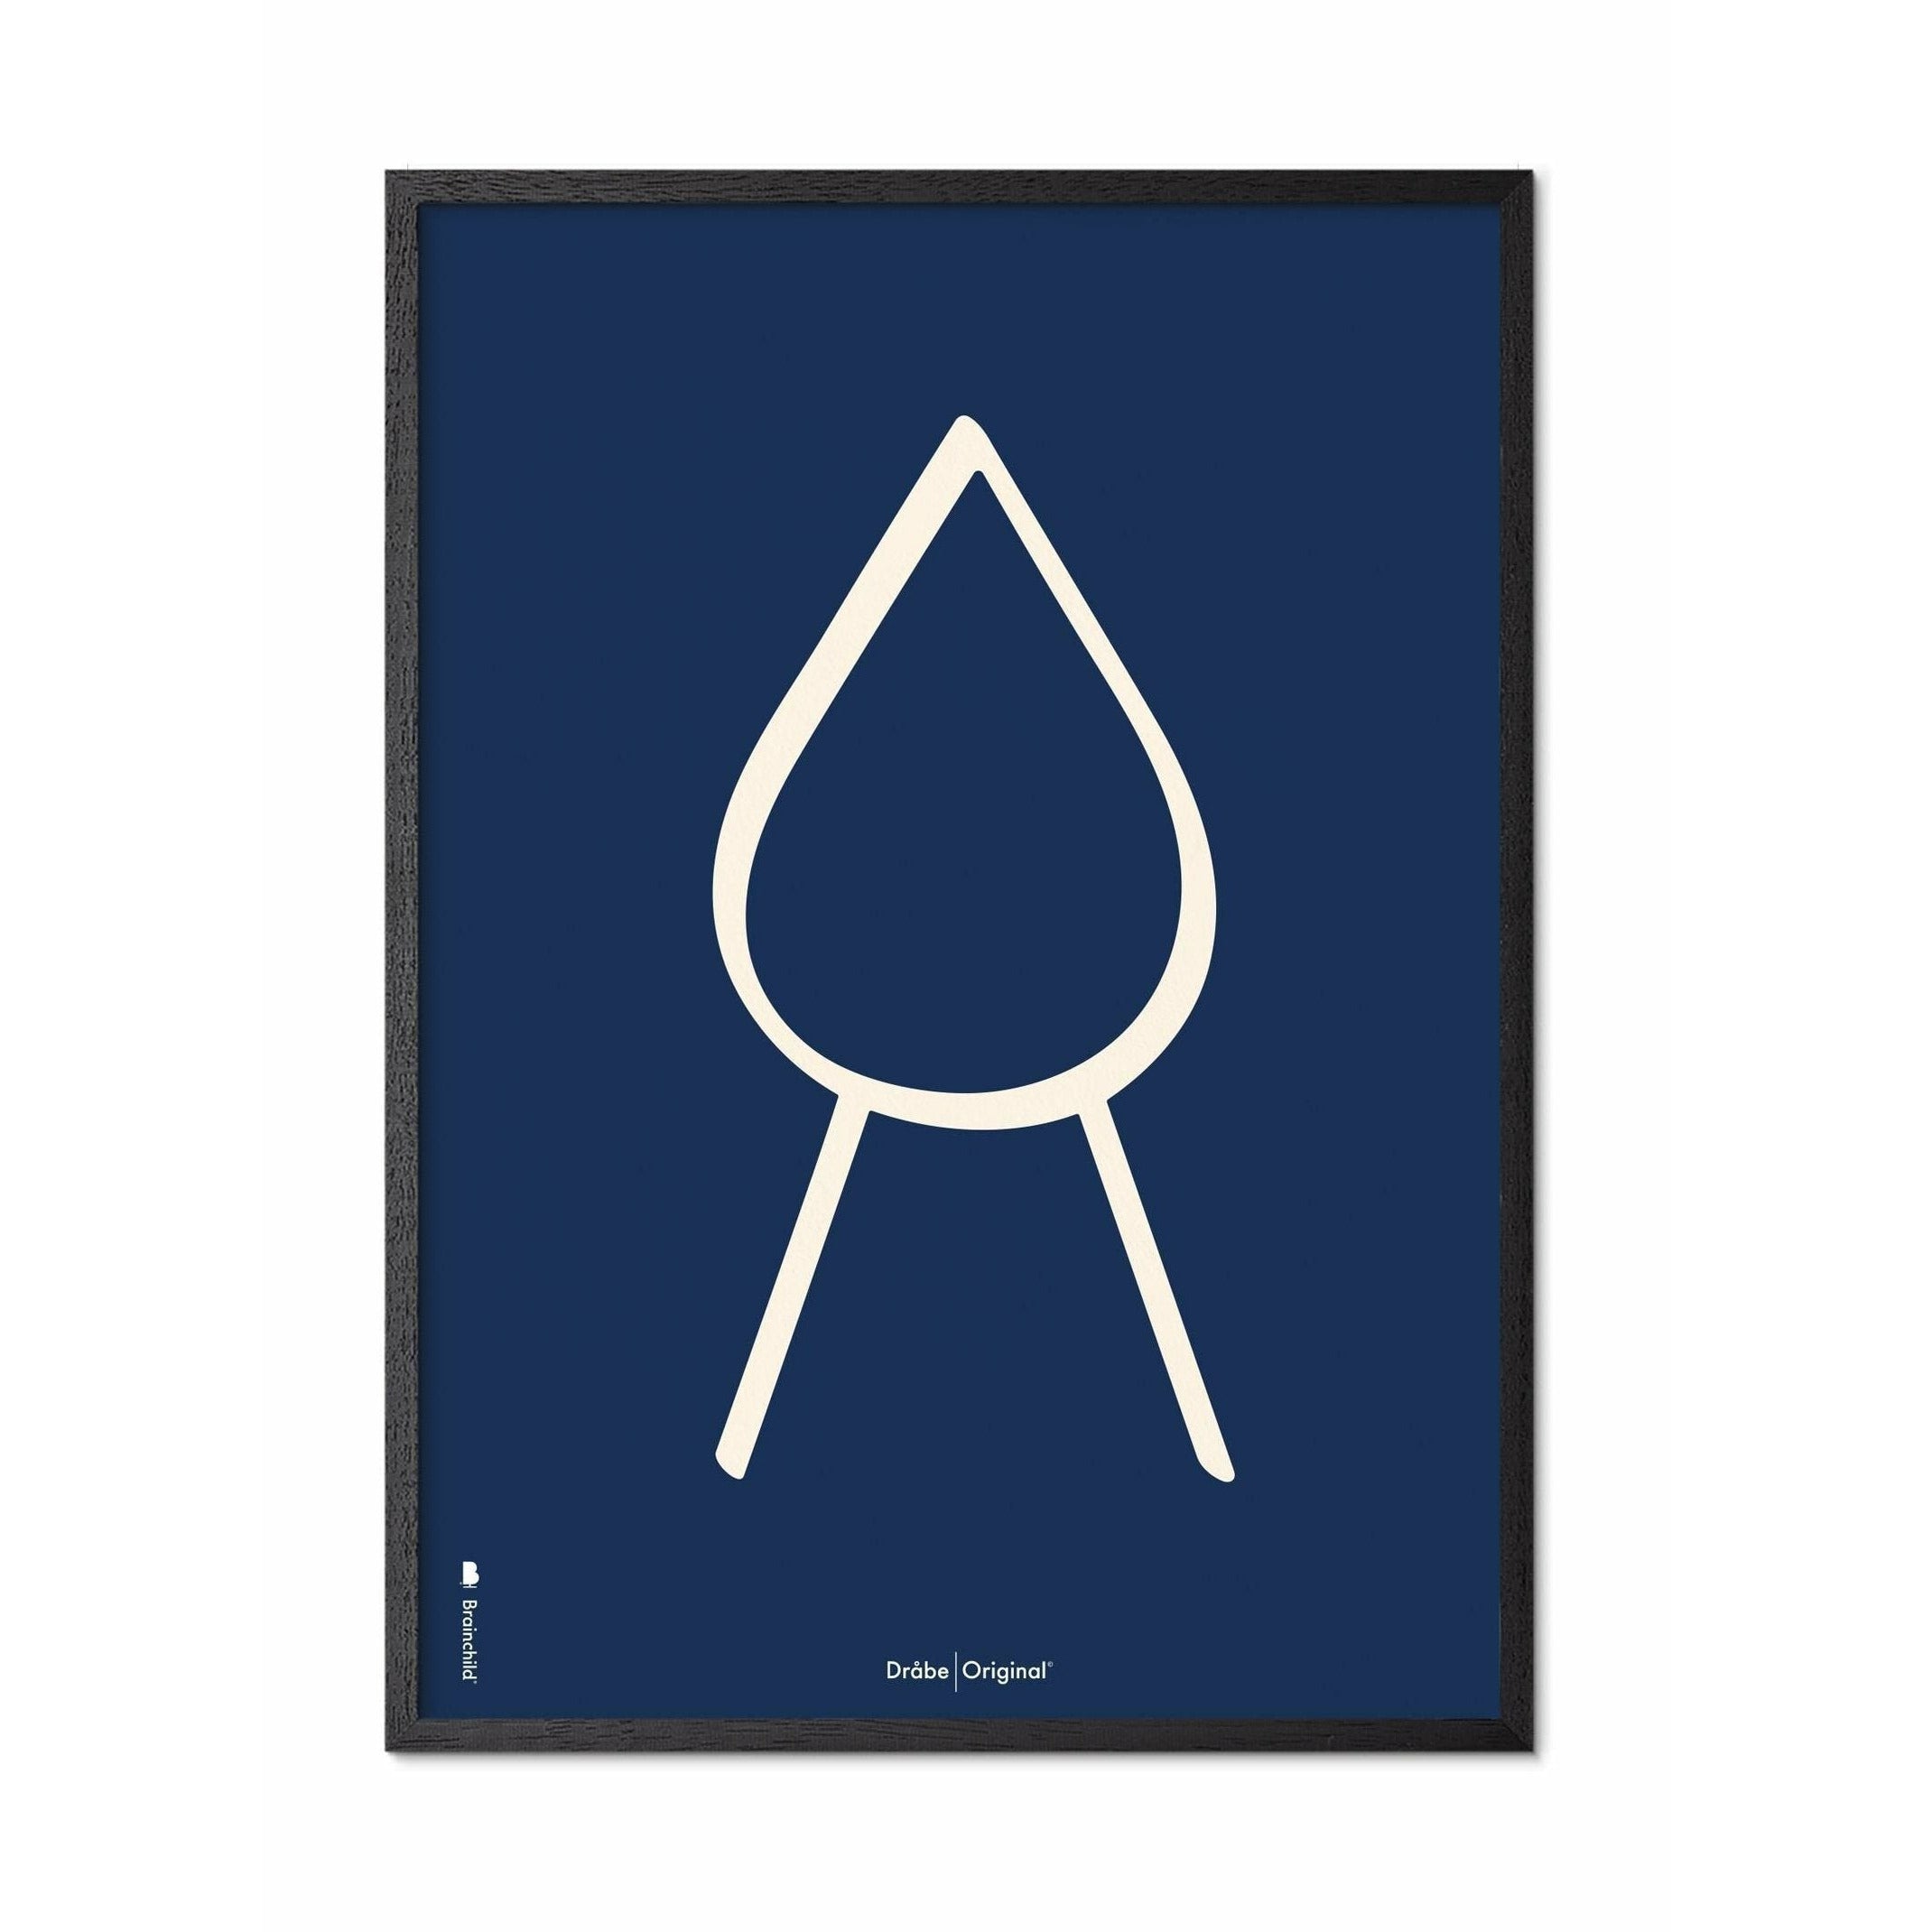 Brainchild Drop Line Poster, Frame In Black Lacquered Wood 50x70 Cm, Blue Background